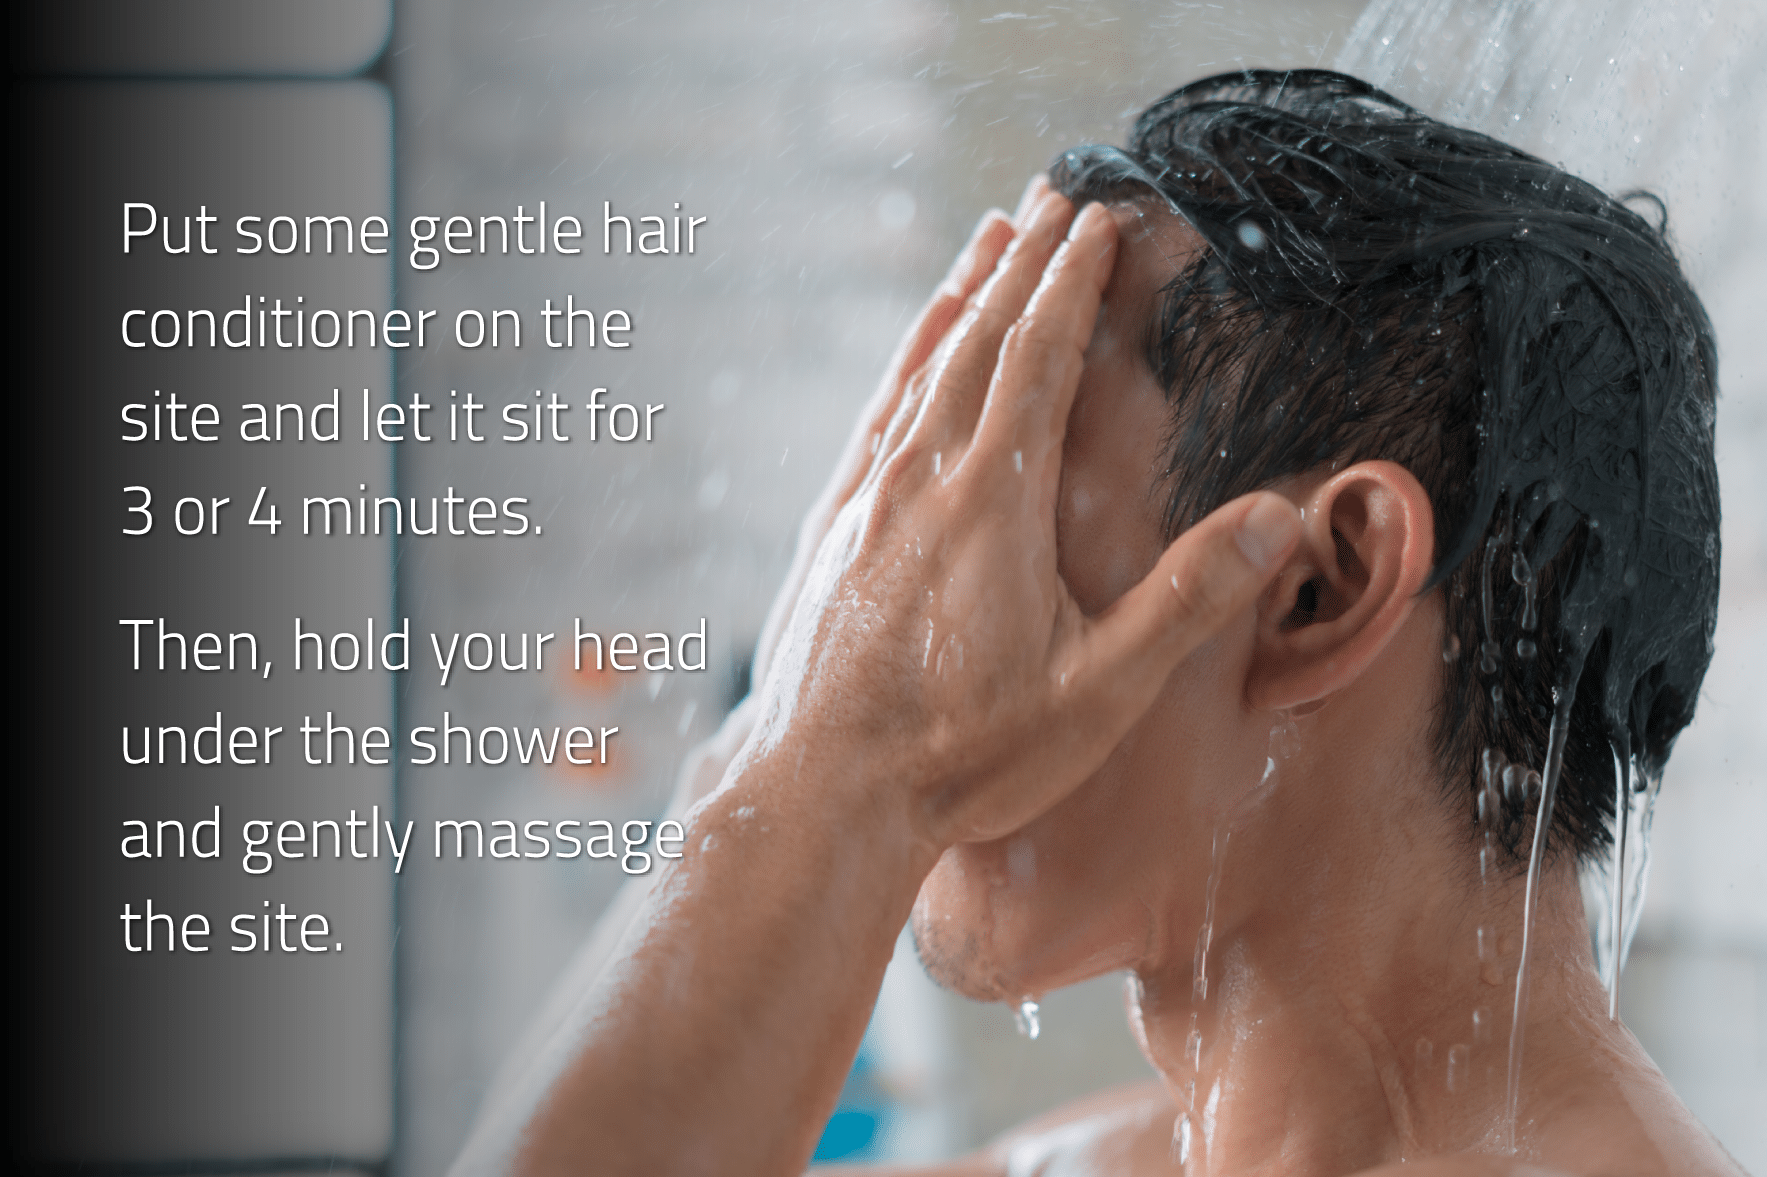 How to Wash Your Hair After a Hair Transplant Surgery